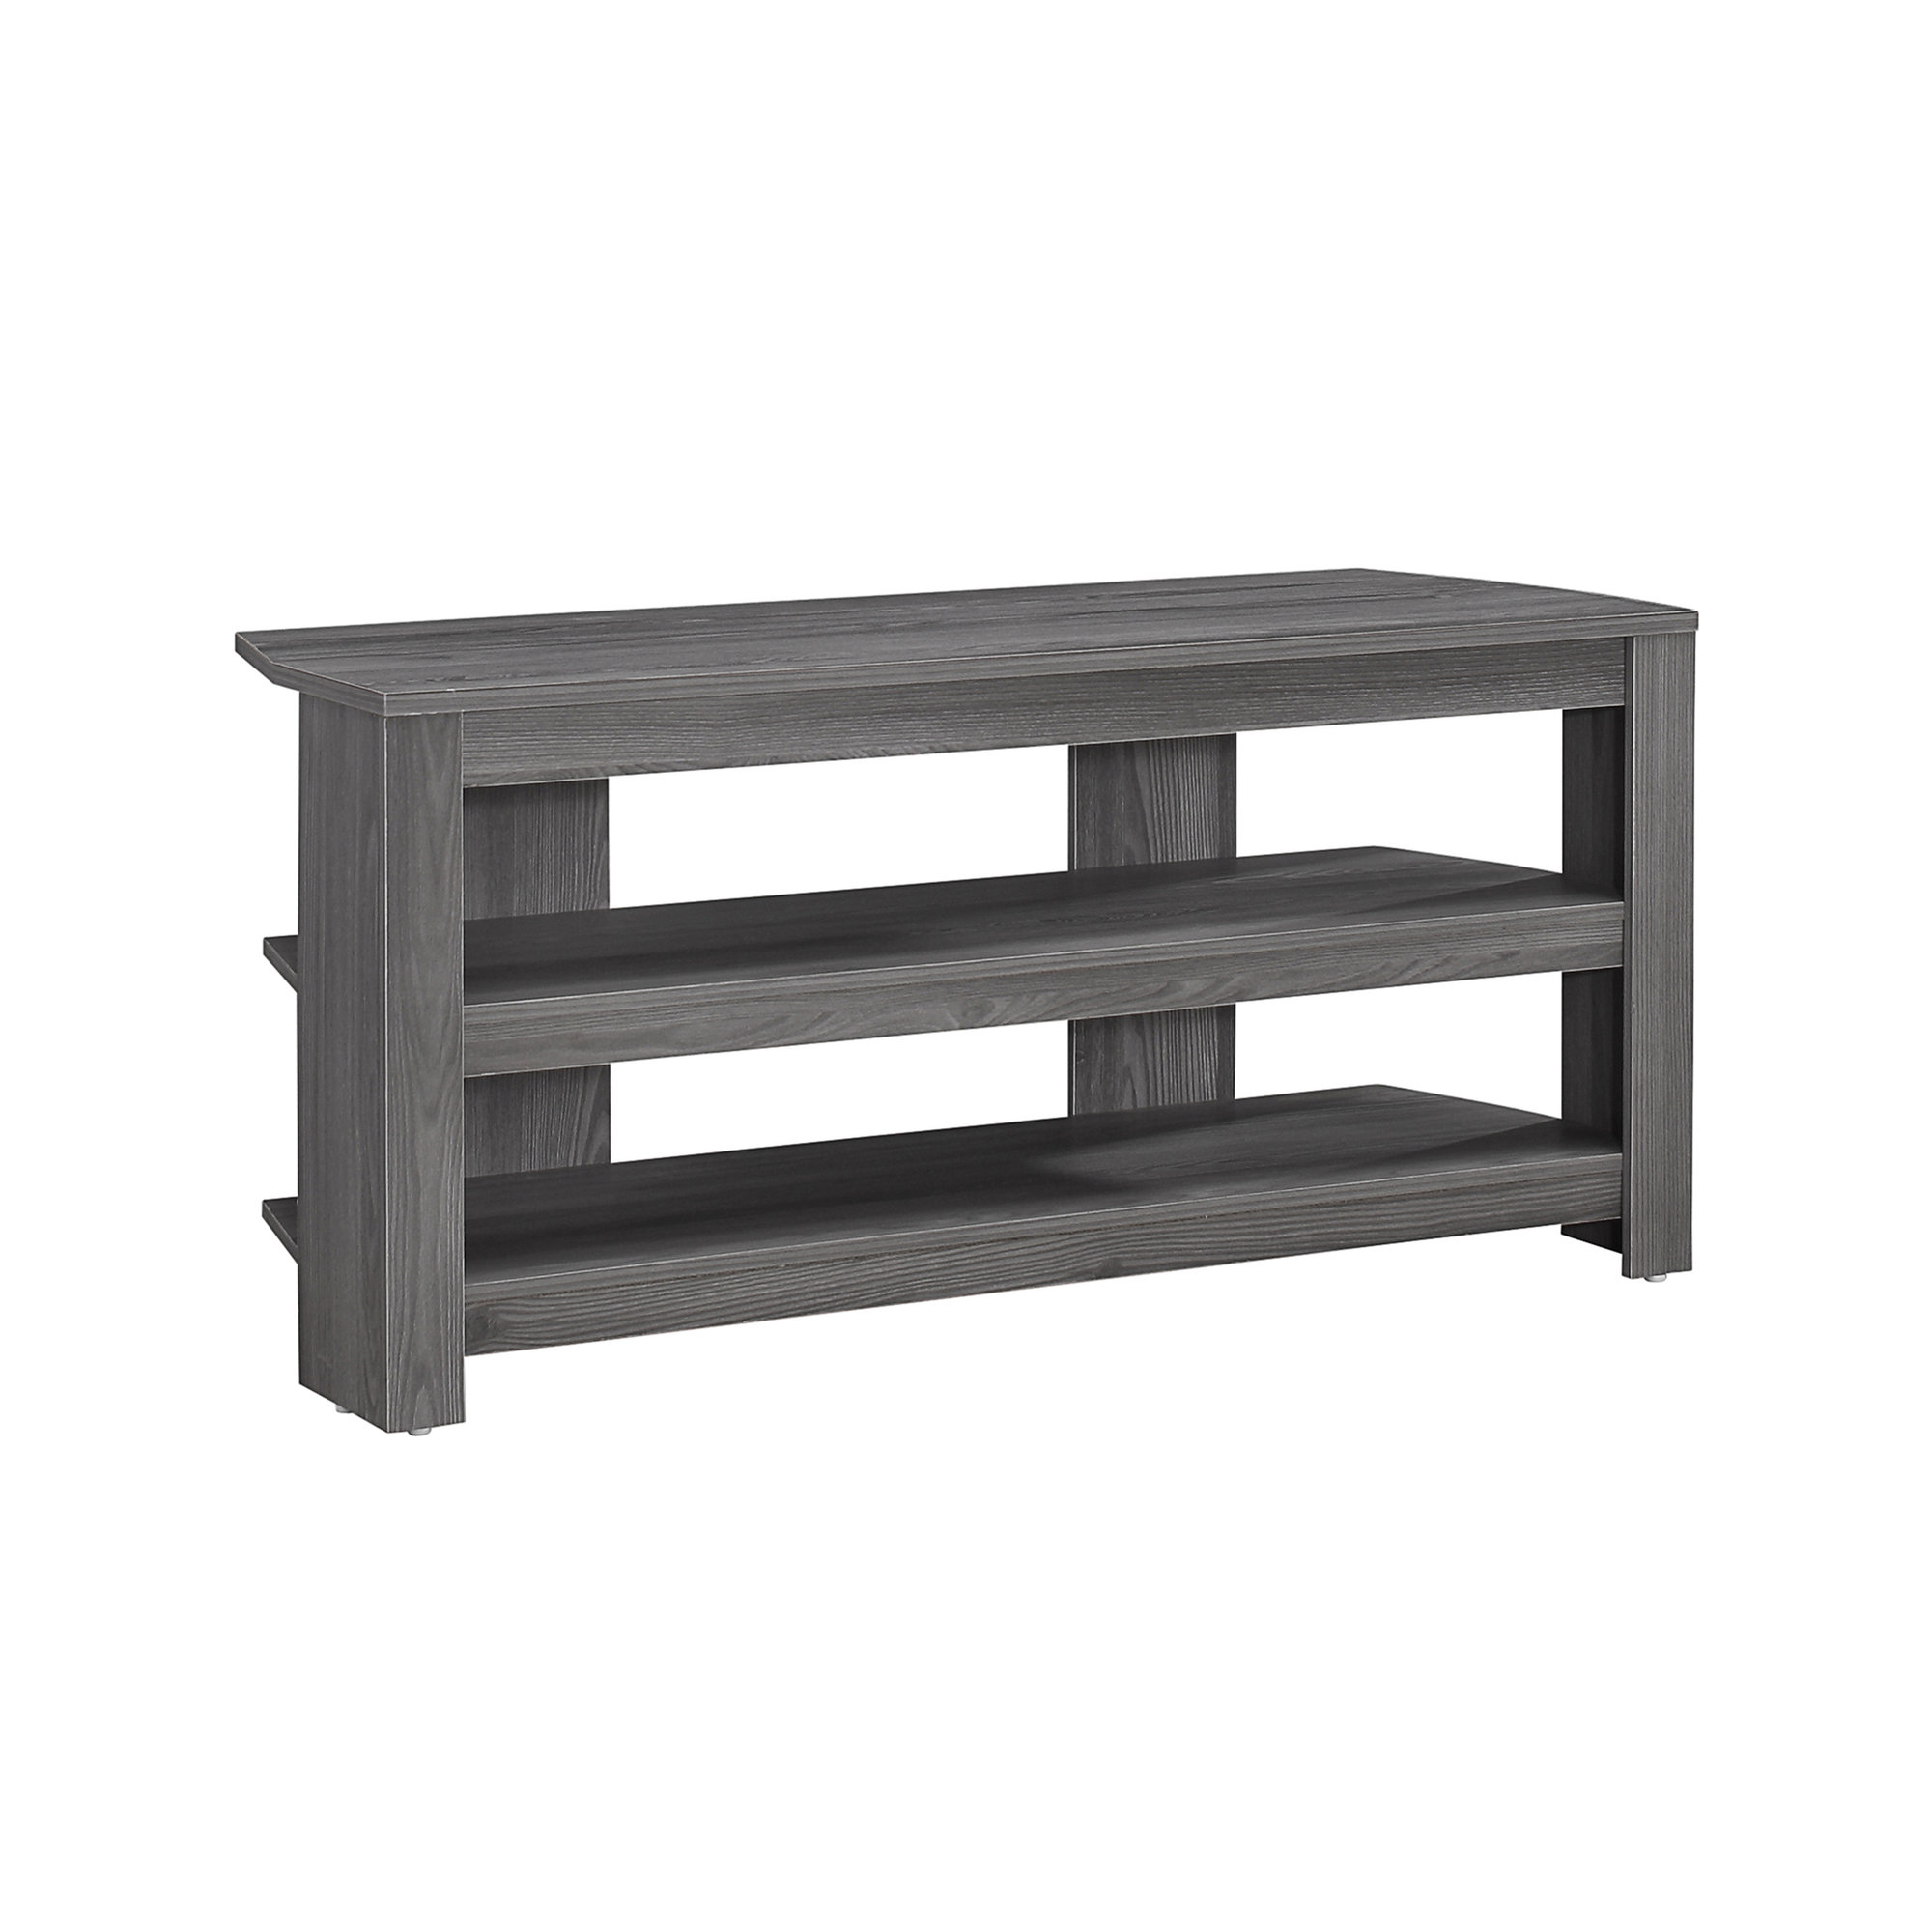 15.5" x 42" x 19.75" Grey Particle Board Laminate TV Stand